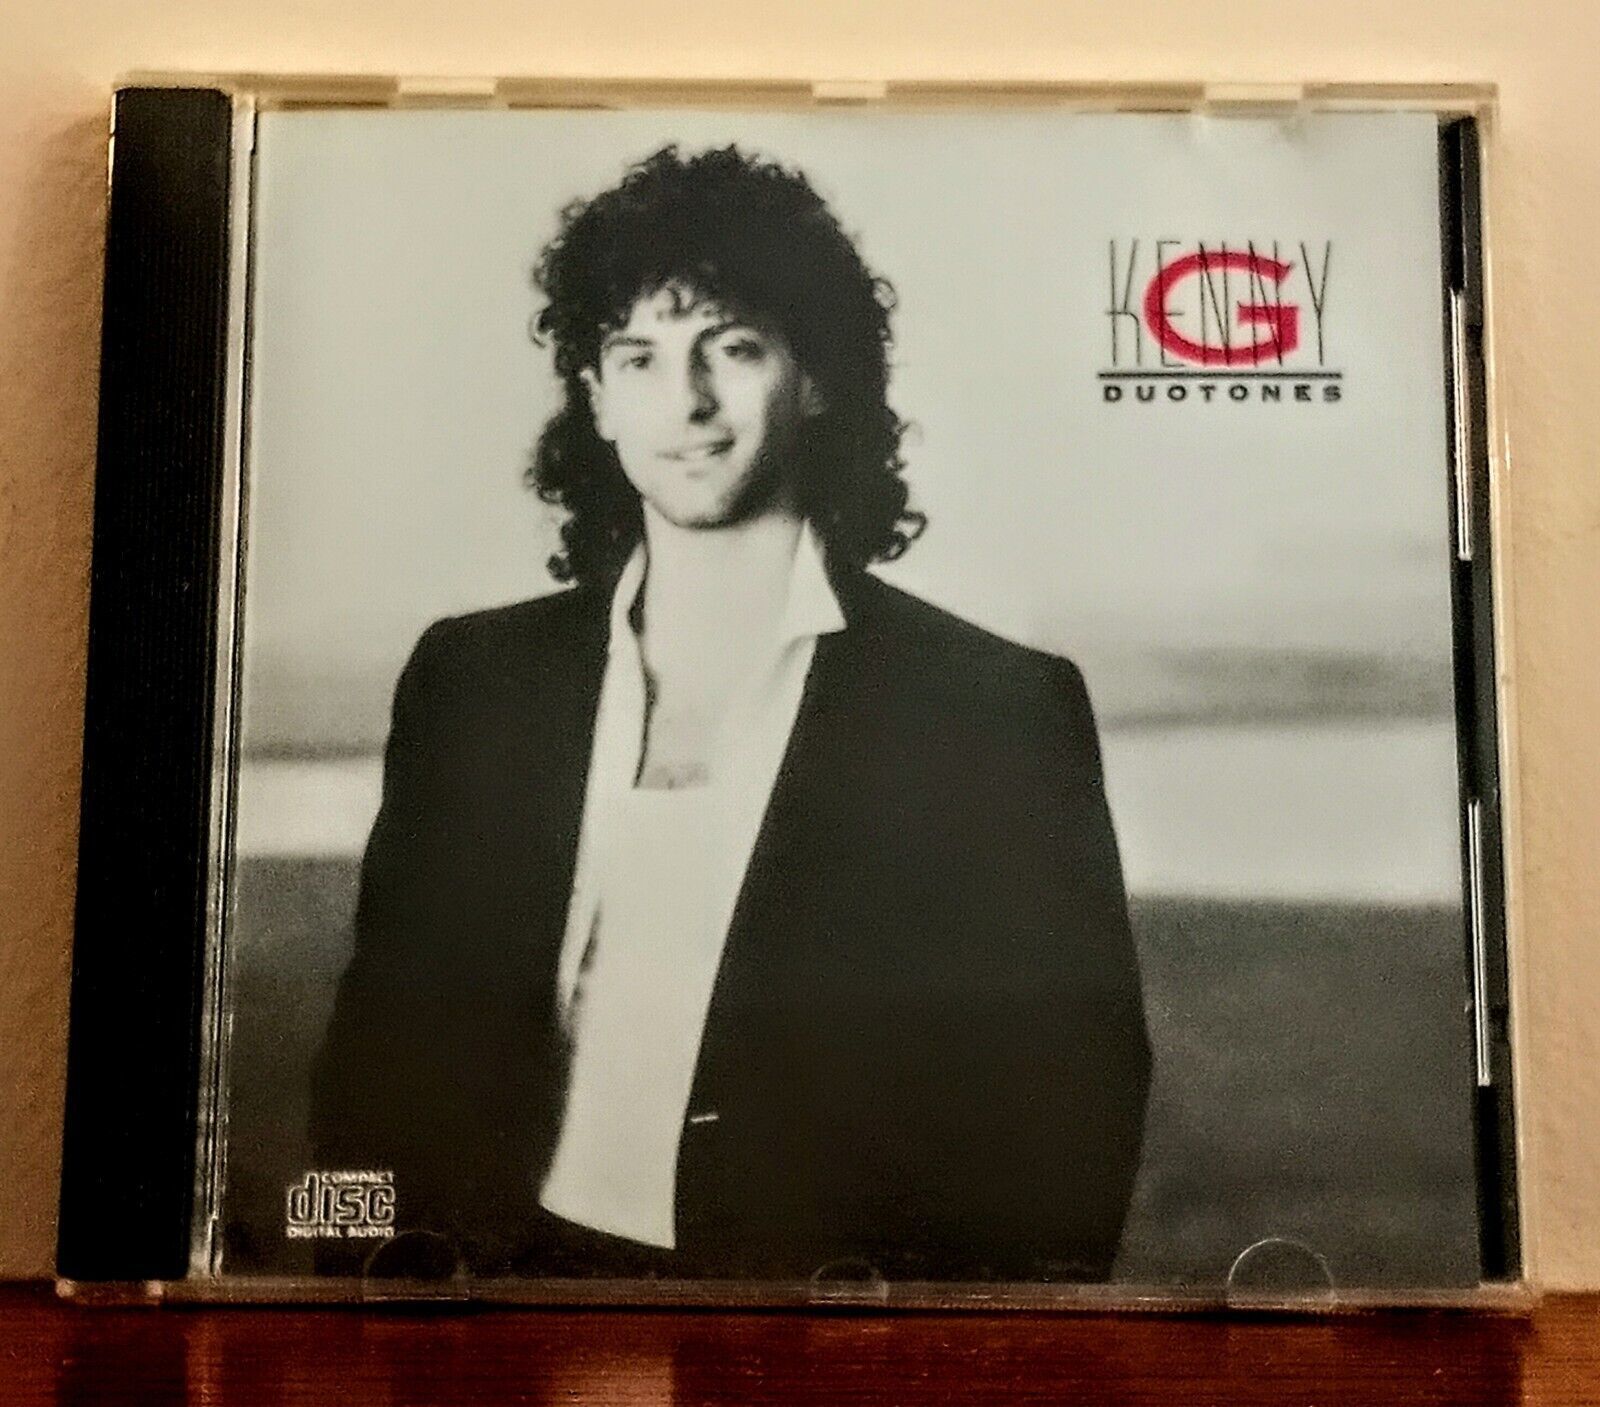 Primary image for KENNY G - DUOTONES CD Arista Records Smooth Soul Jazz Music Album1986 Remastered